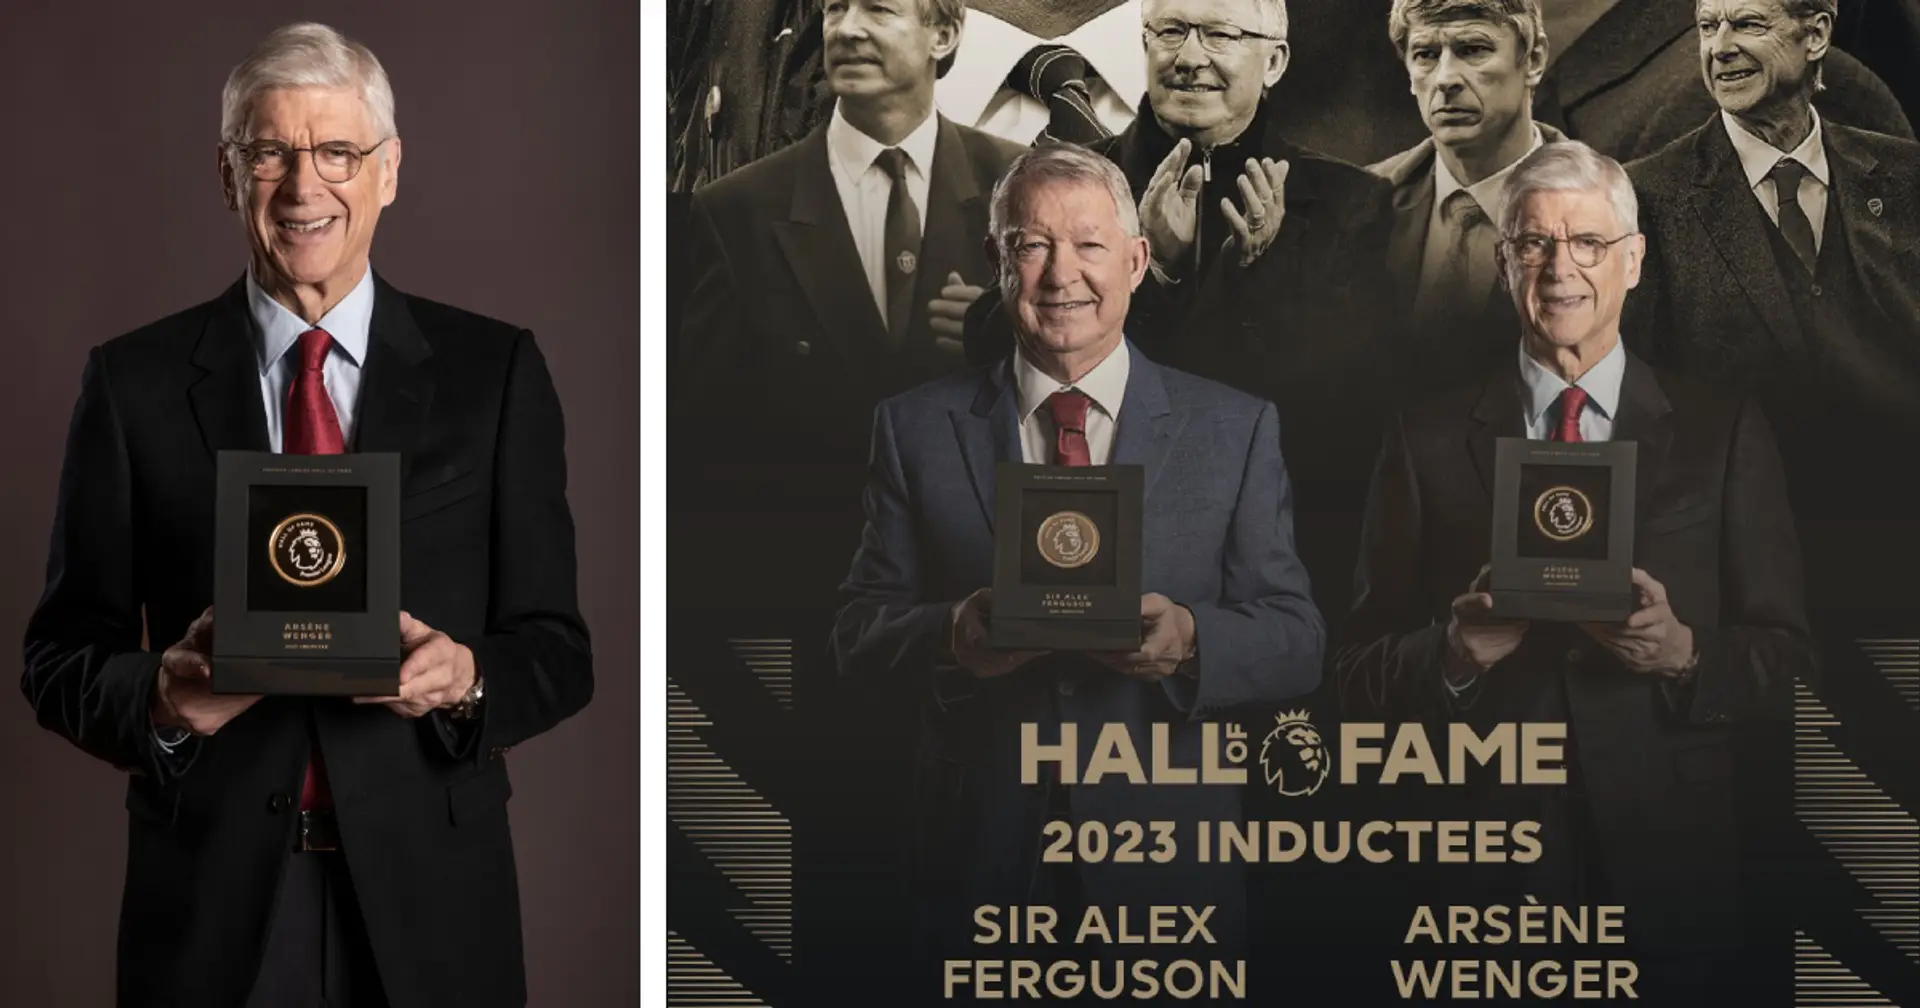 Arsene Wenger inducted into Premier League Hall of Fame — Mikel Arteta reacts